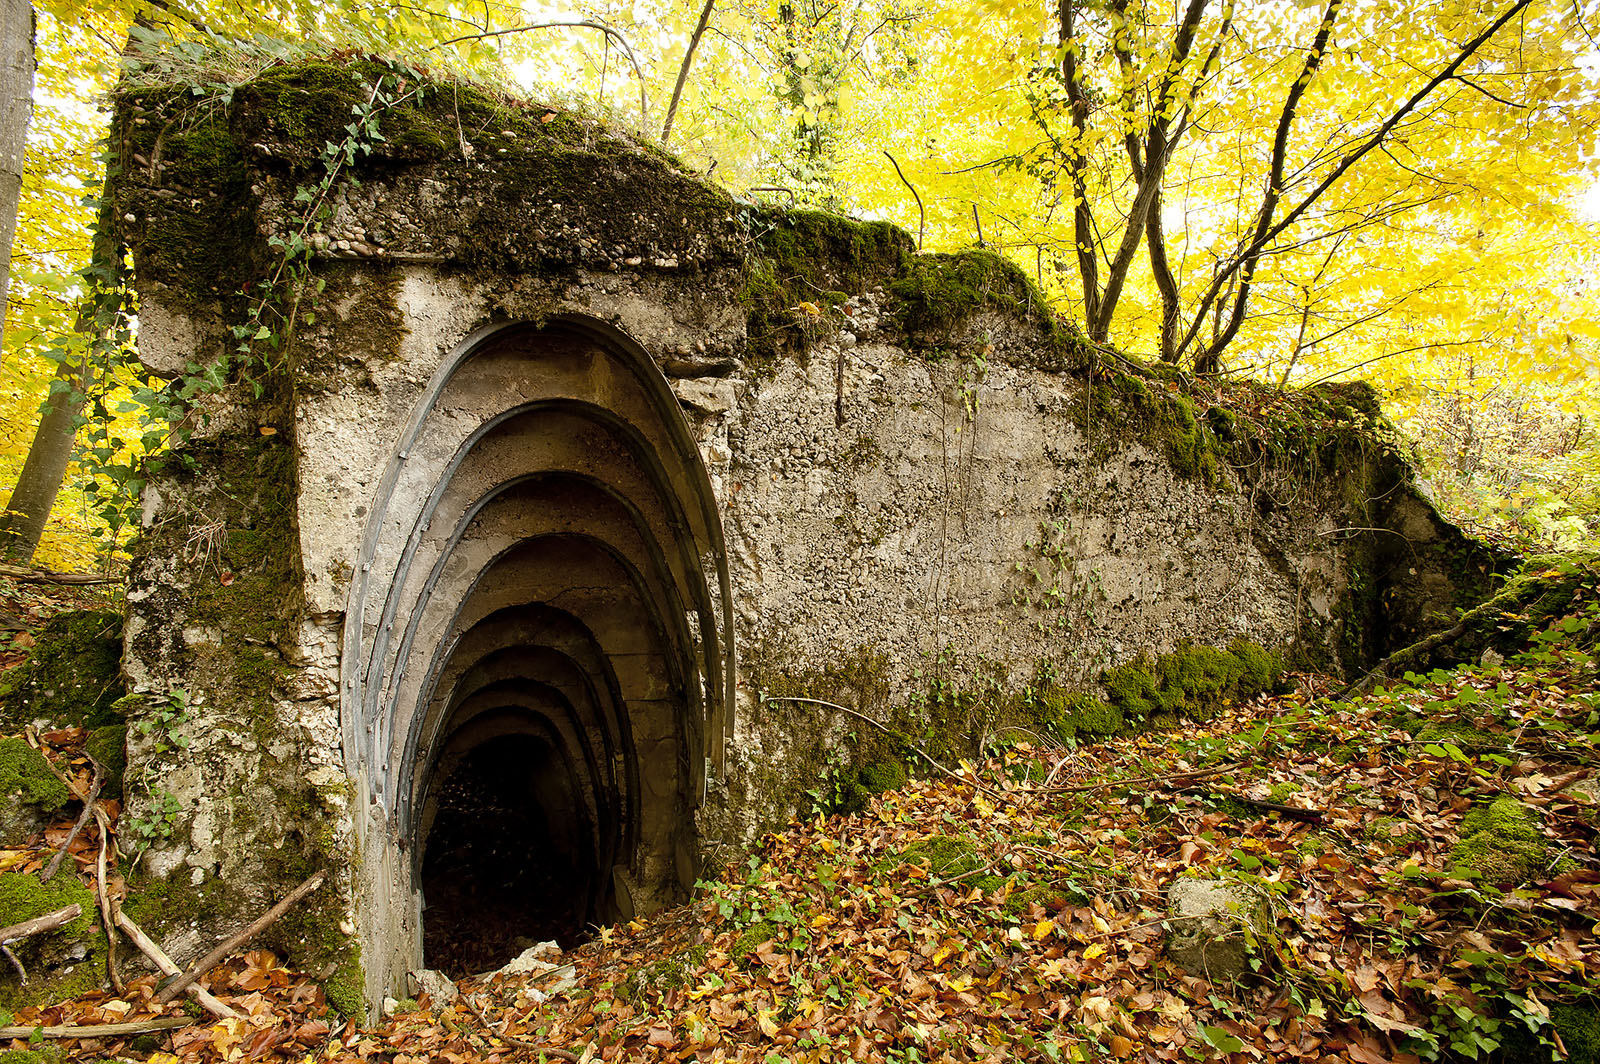 Modern photograph. A ruined wall with the semi-circular entrance to a bunker in it. The entrance is finely constructed as a series of concentric semi-circles leading underground.